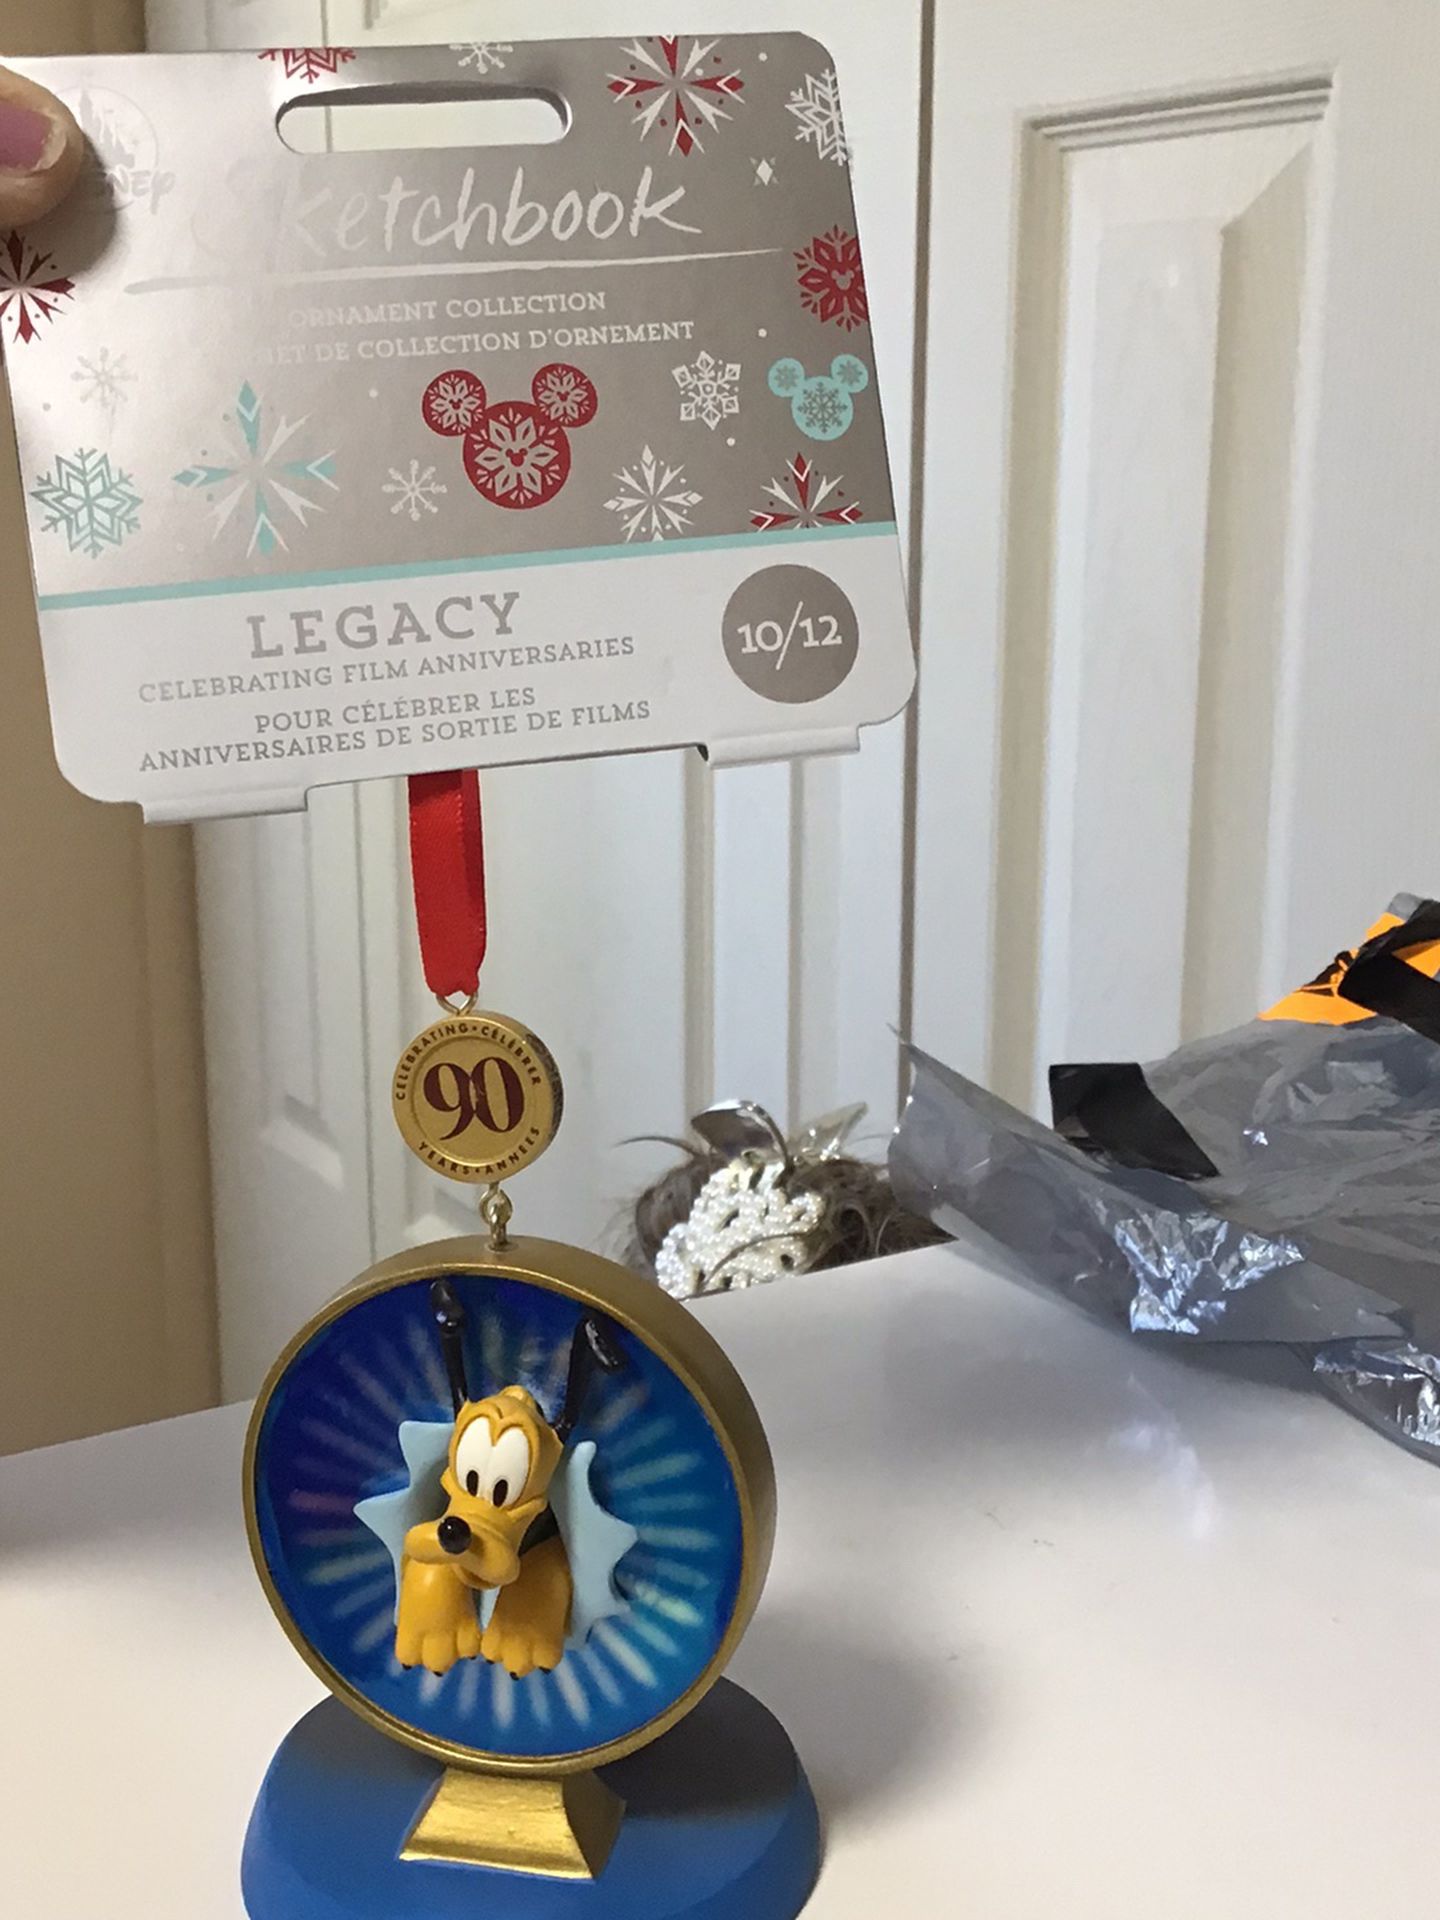 DISNEY ORNAMENT COLLECTION CELEBRATING 90 YEARS PLUTO N E W